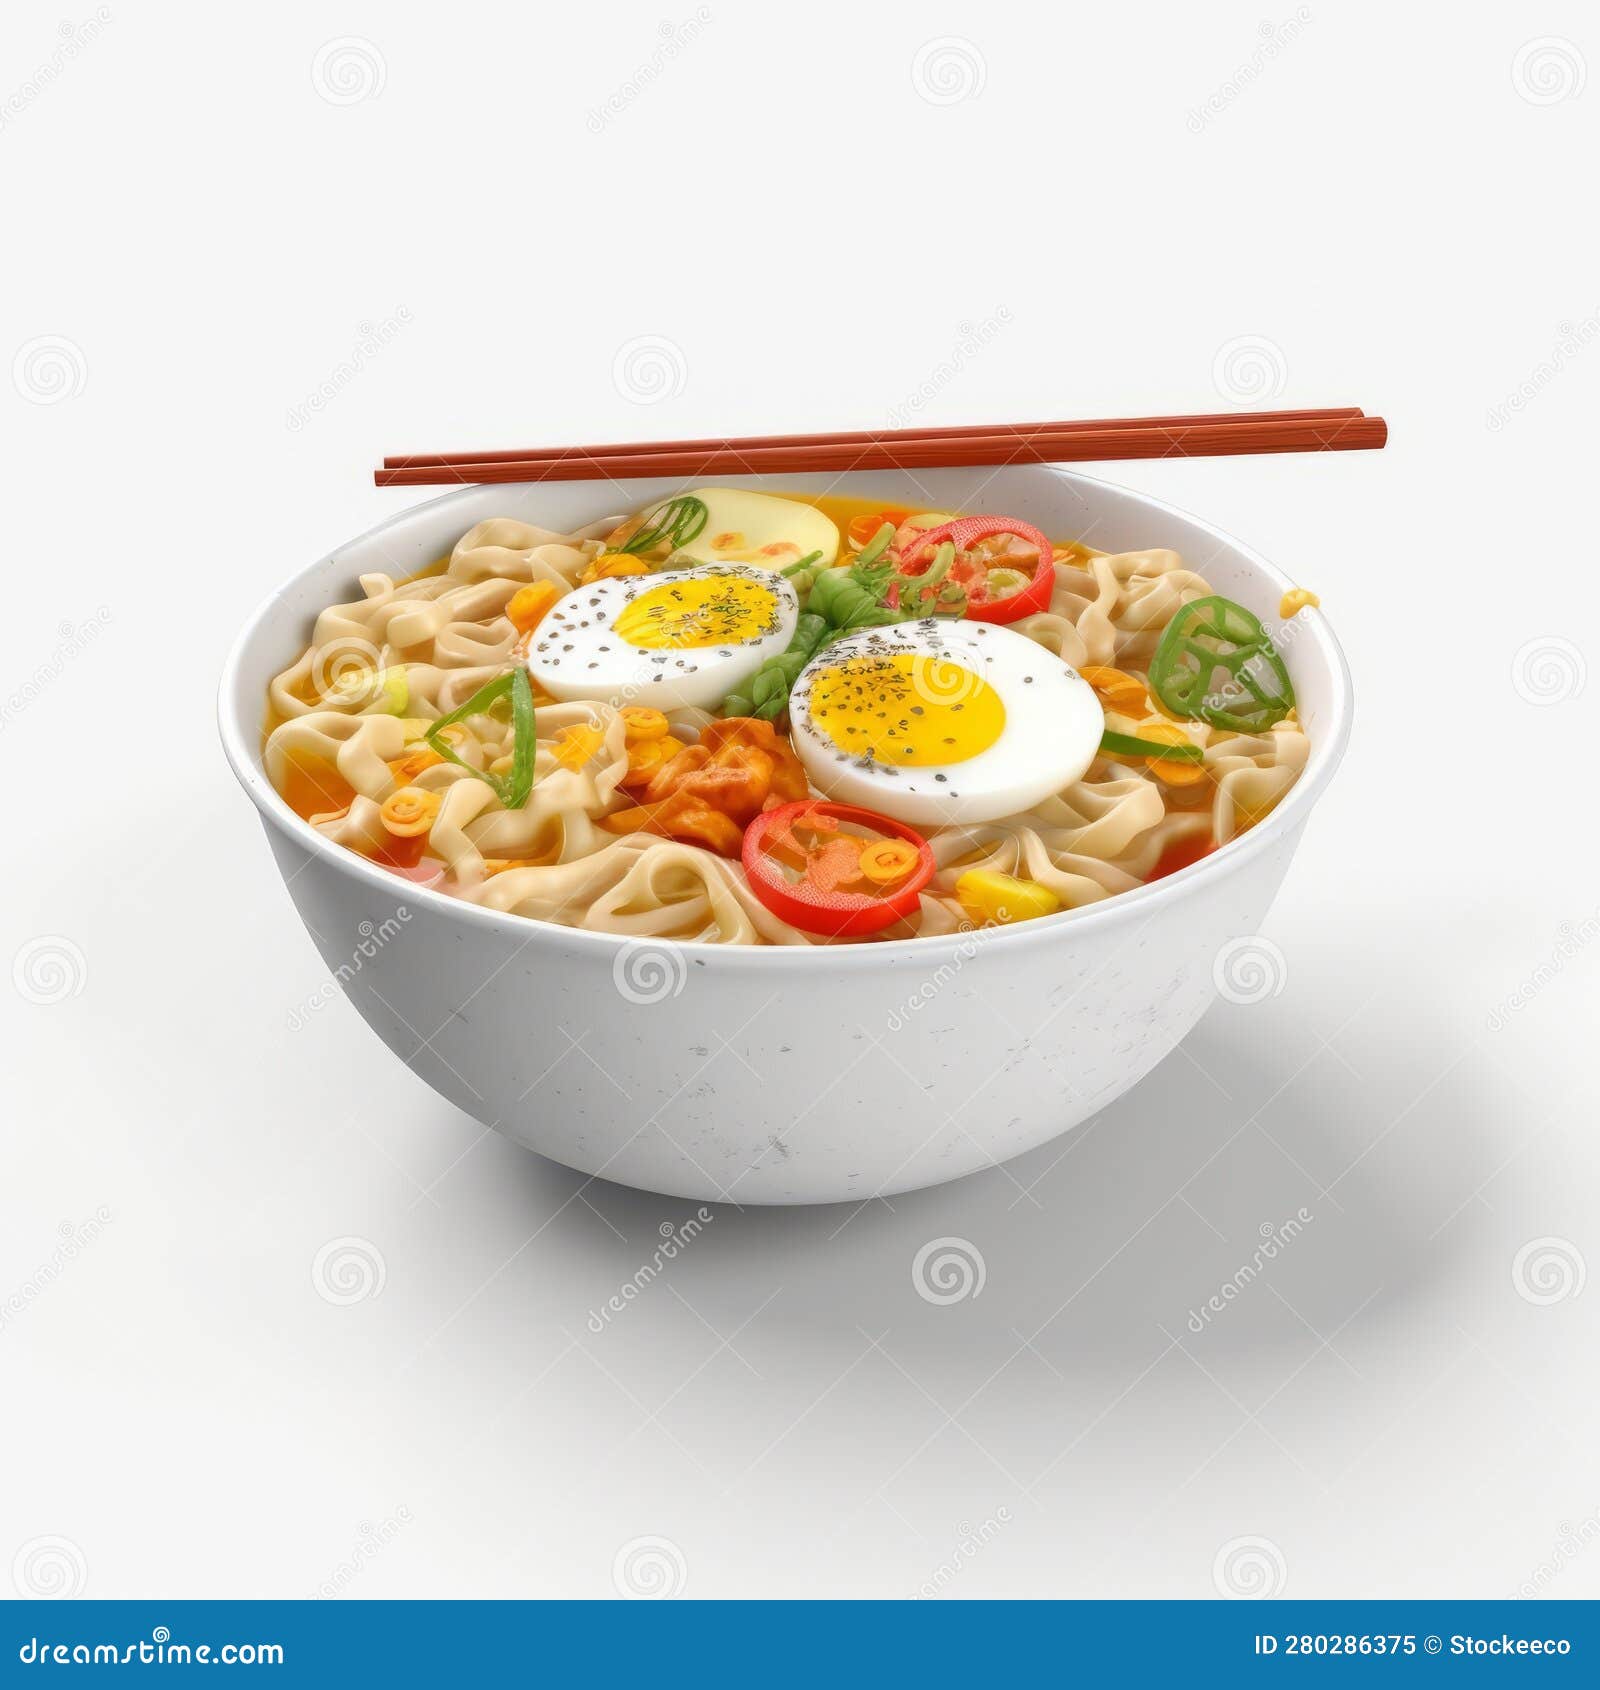 Fried Egg Noodle 4k Art Image Preview: Photorealistic Rendering with ...